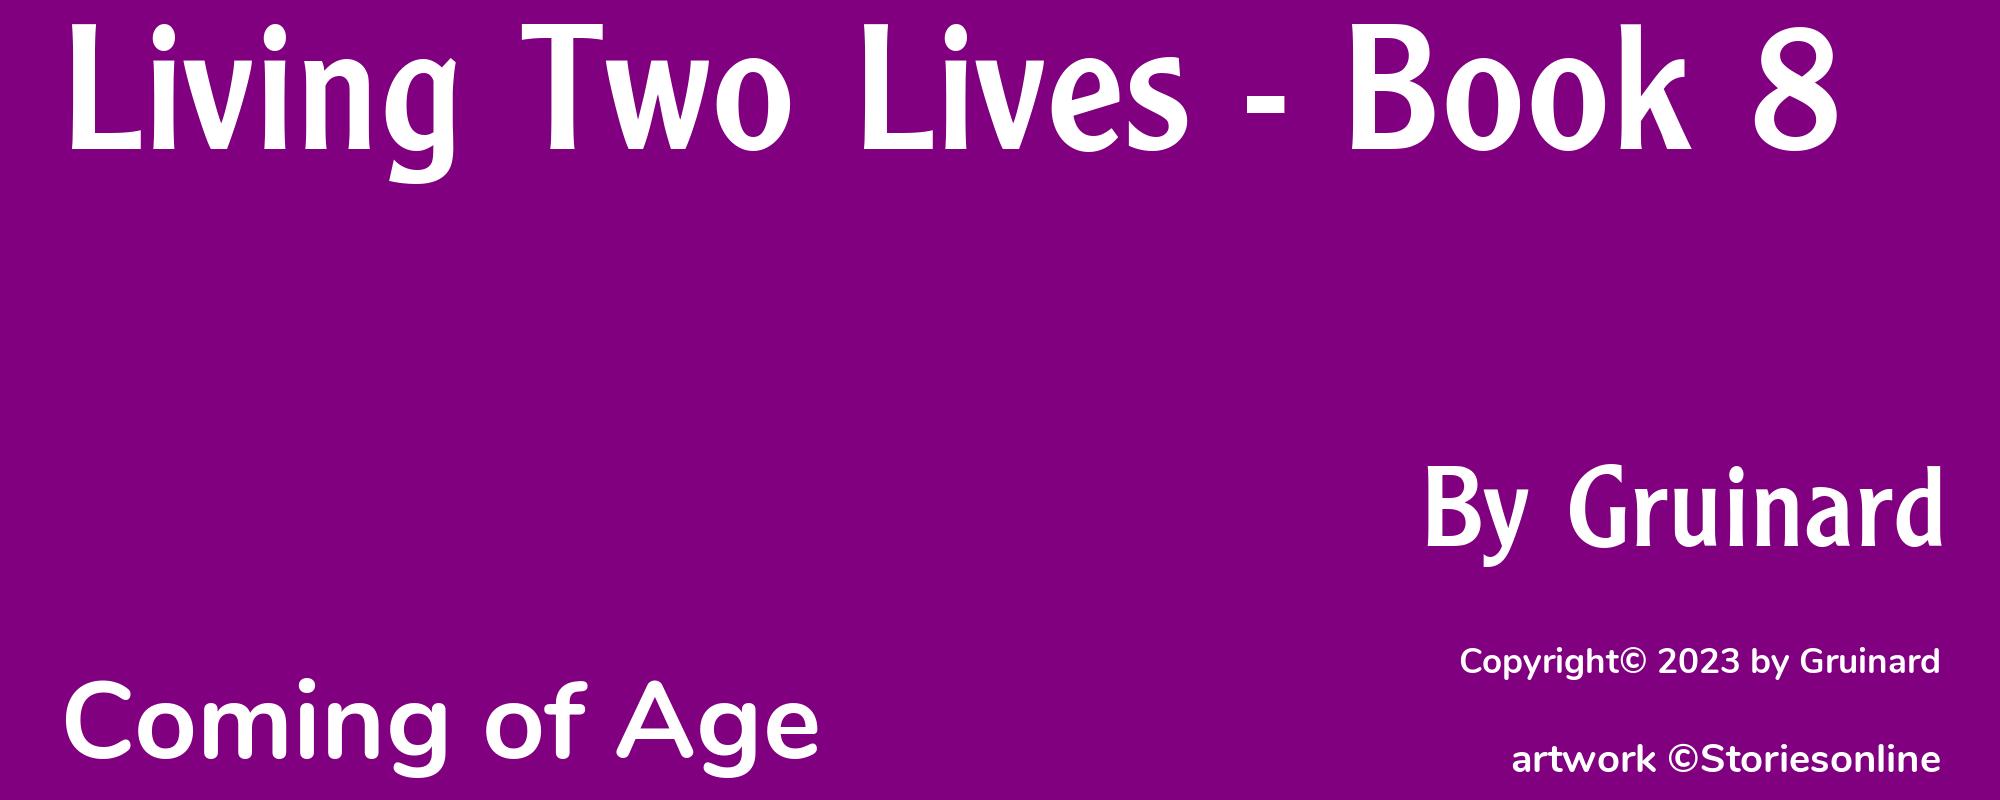 Living Two Lives - Book 8 - Cover